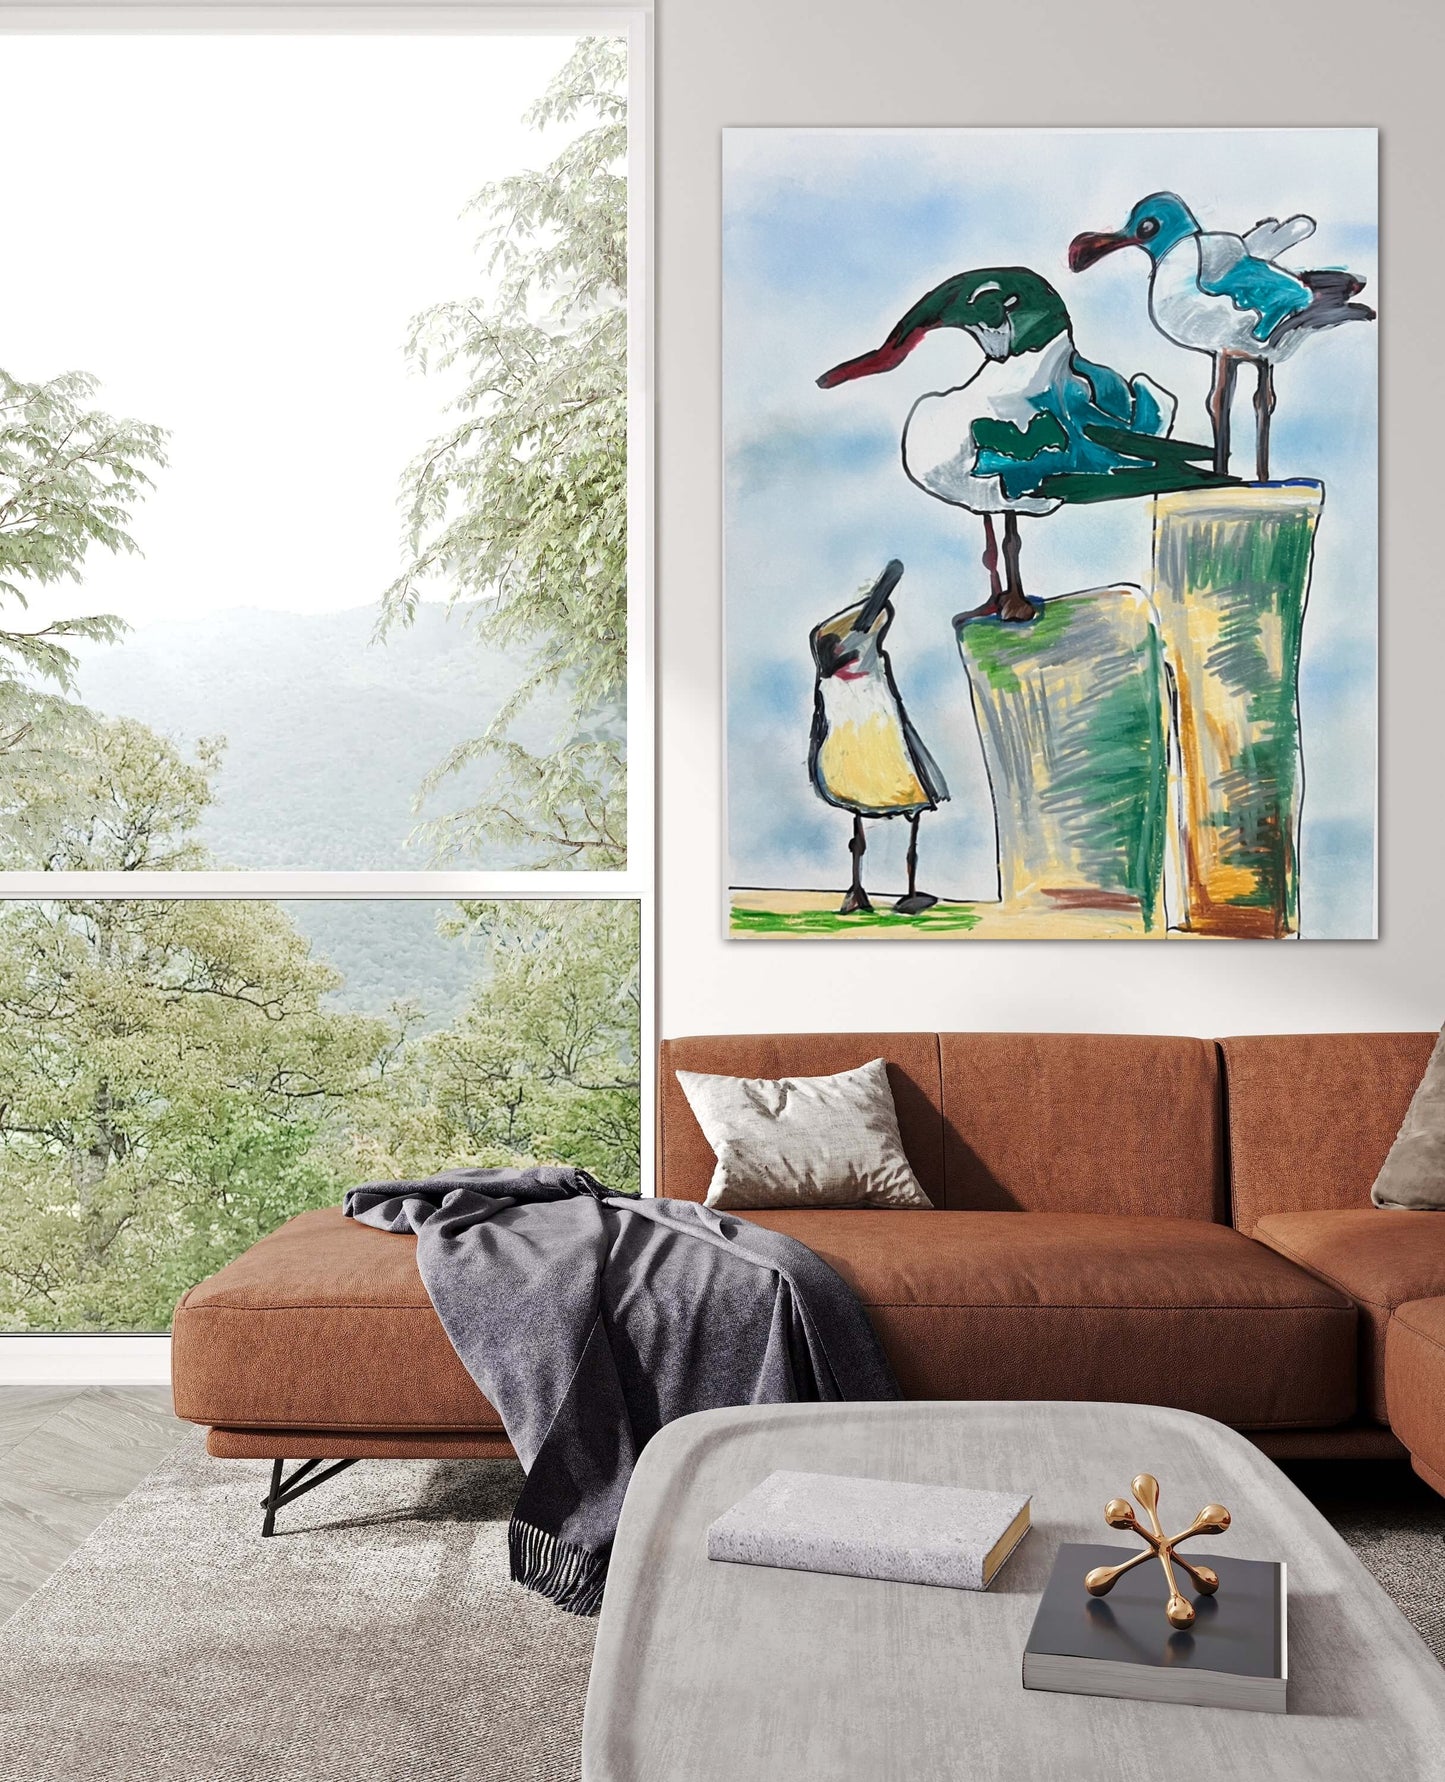 The Seagulls - Print, Poster, Stretched Canvas Print